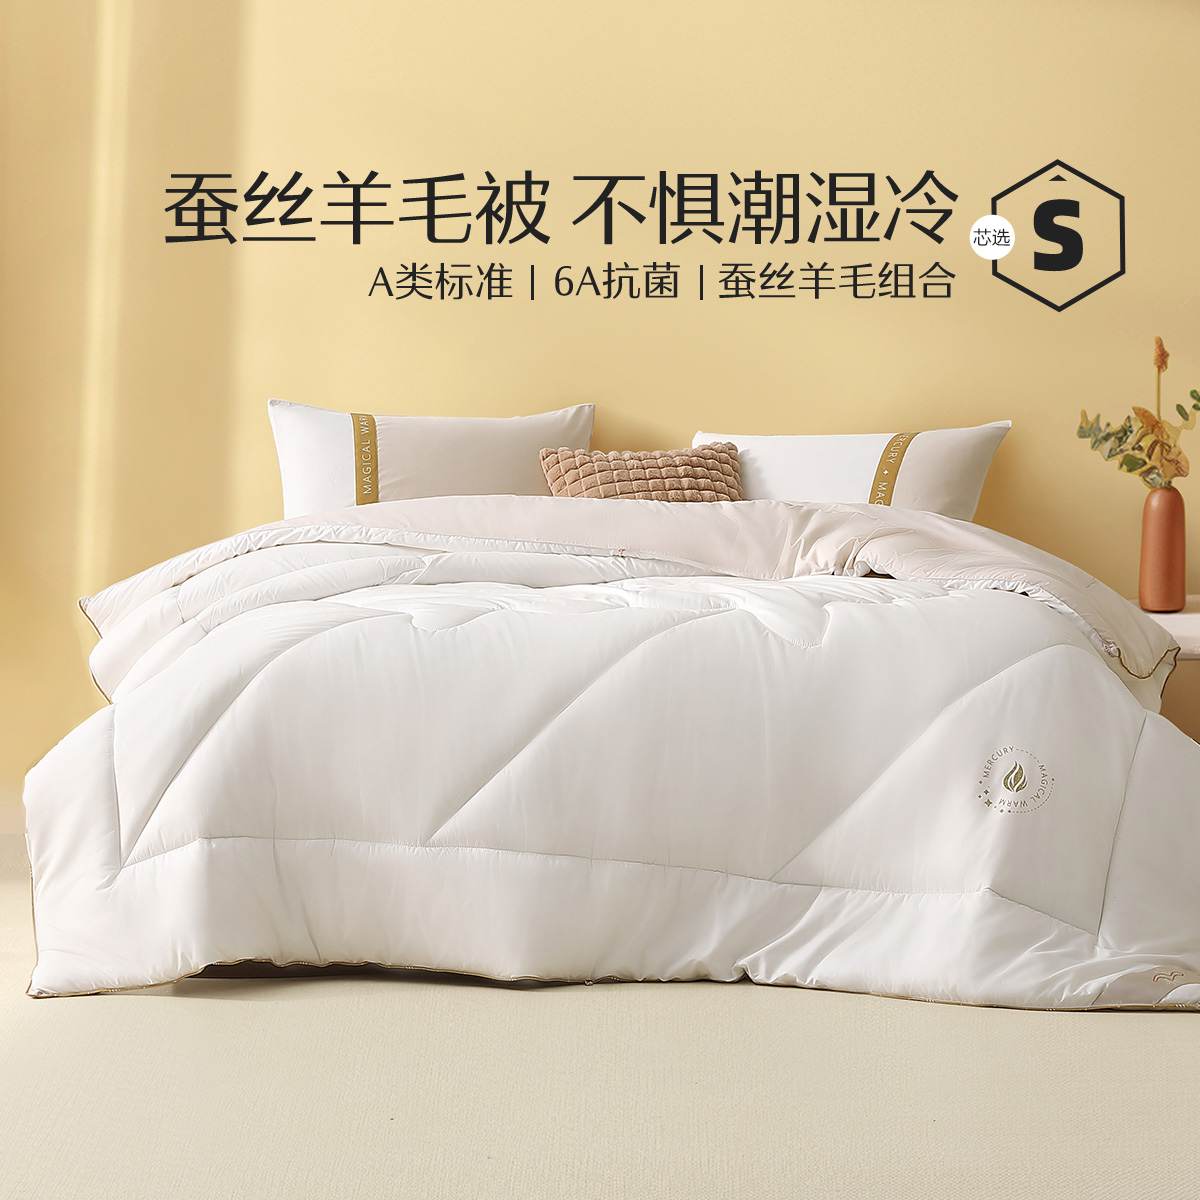 Water Star Home Spun Silk Wool Two-in-one Quilt by Antibacterial Anti-Mite Four Seasons Universal Quilt by Core -929 - Taobao